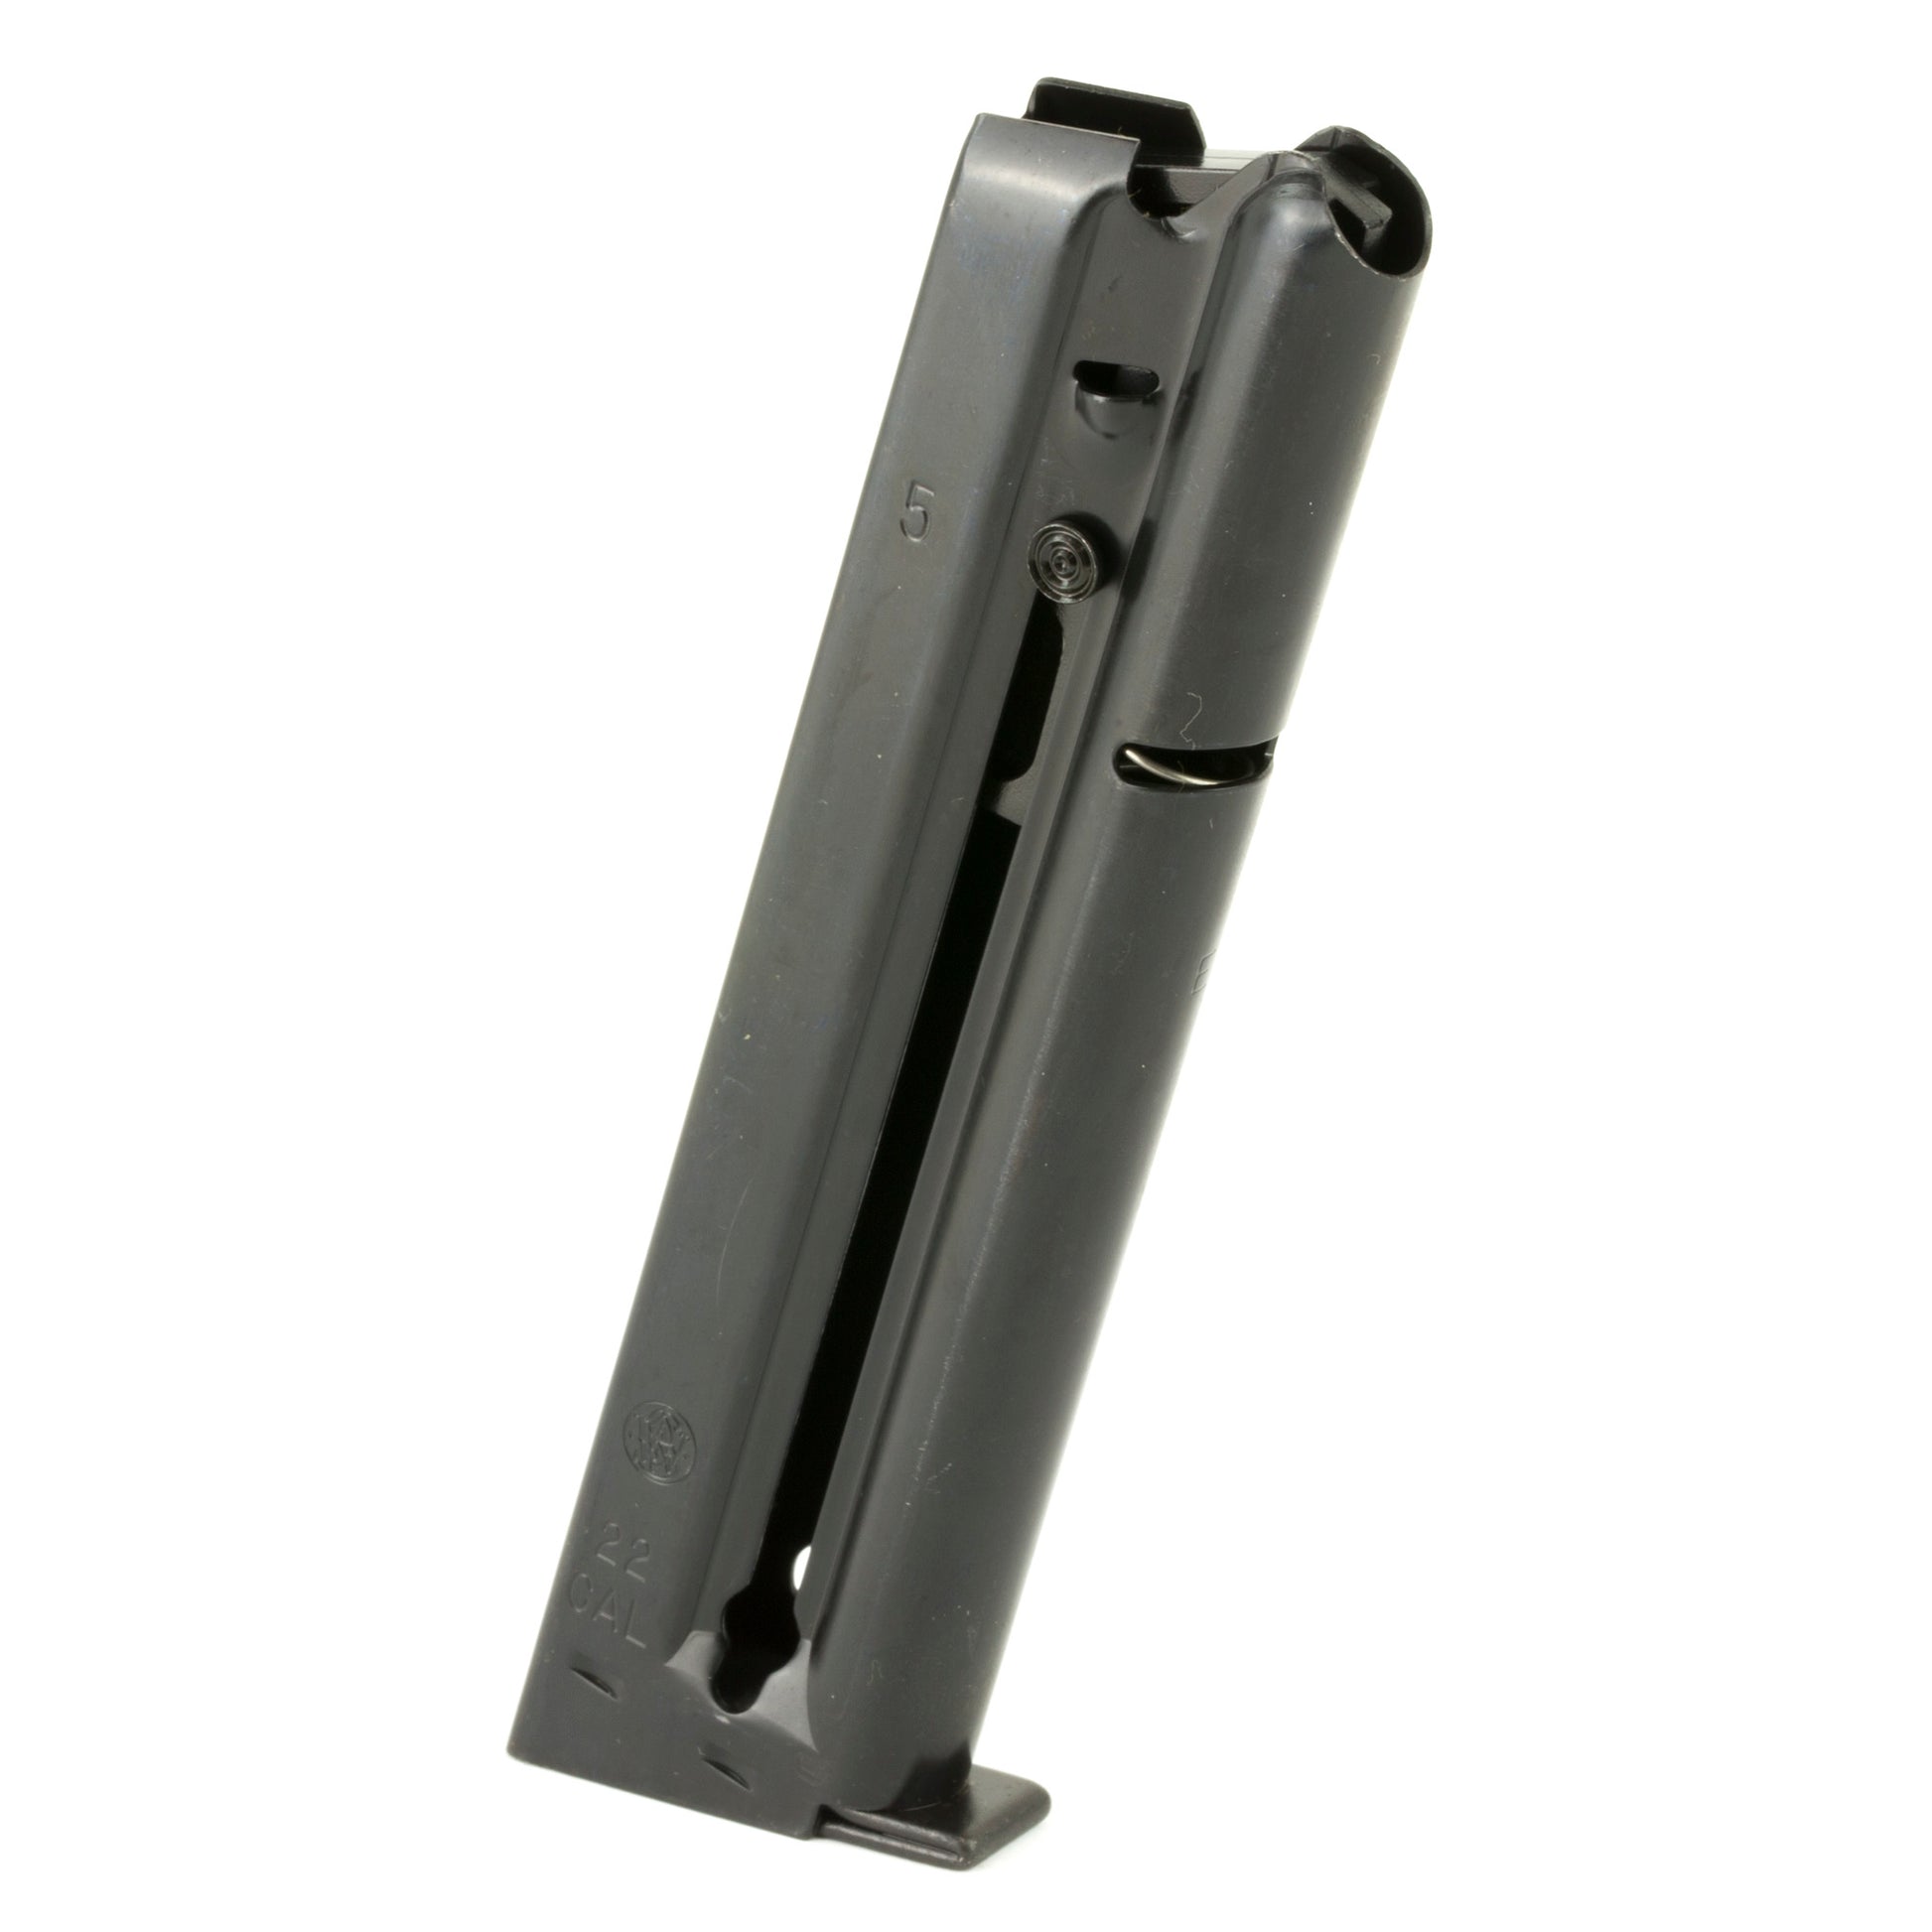 Smith & Wesson Magazine 22LR 10 Rounds Fits 41/ 622/ 2206 Blued 190500000 - California Shooting Supplies